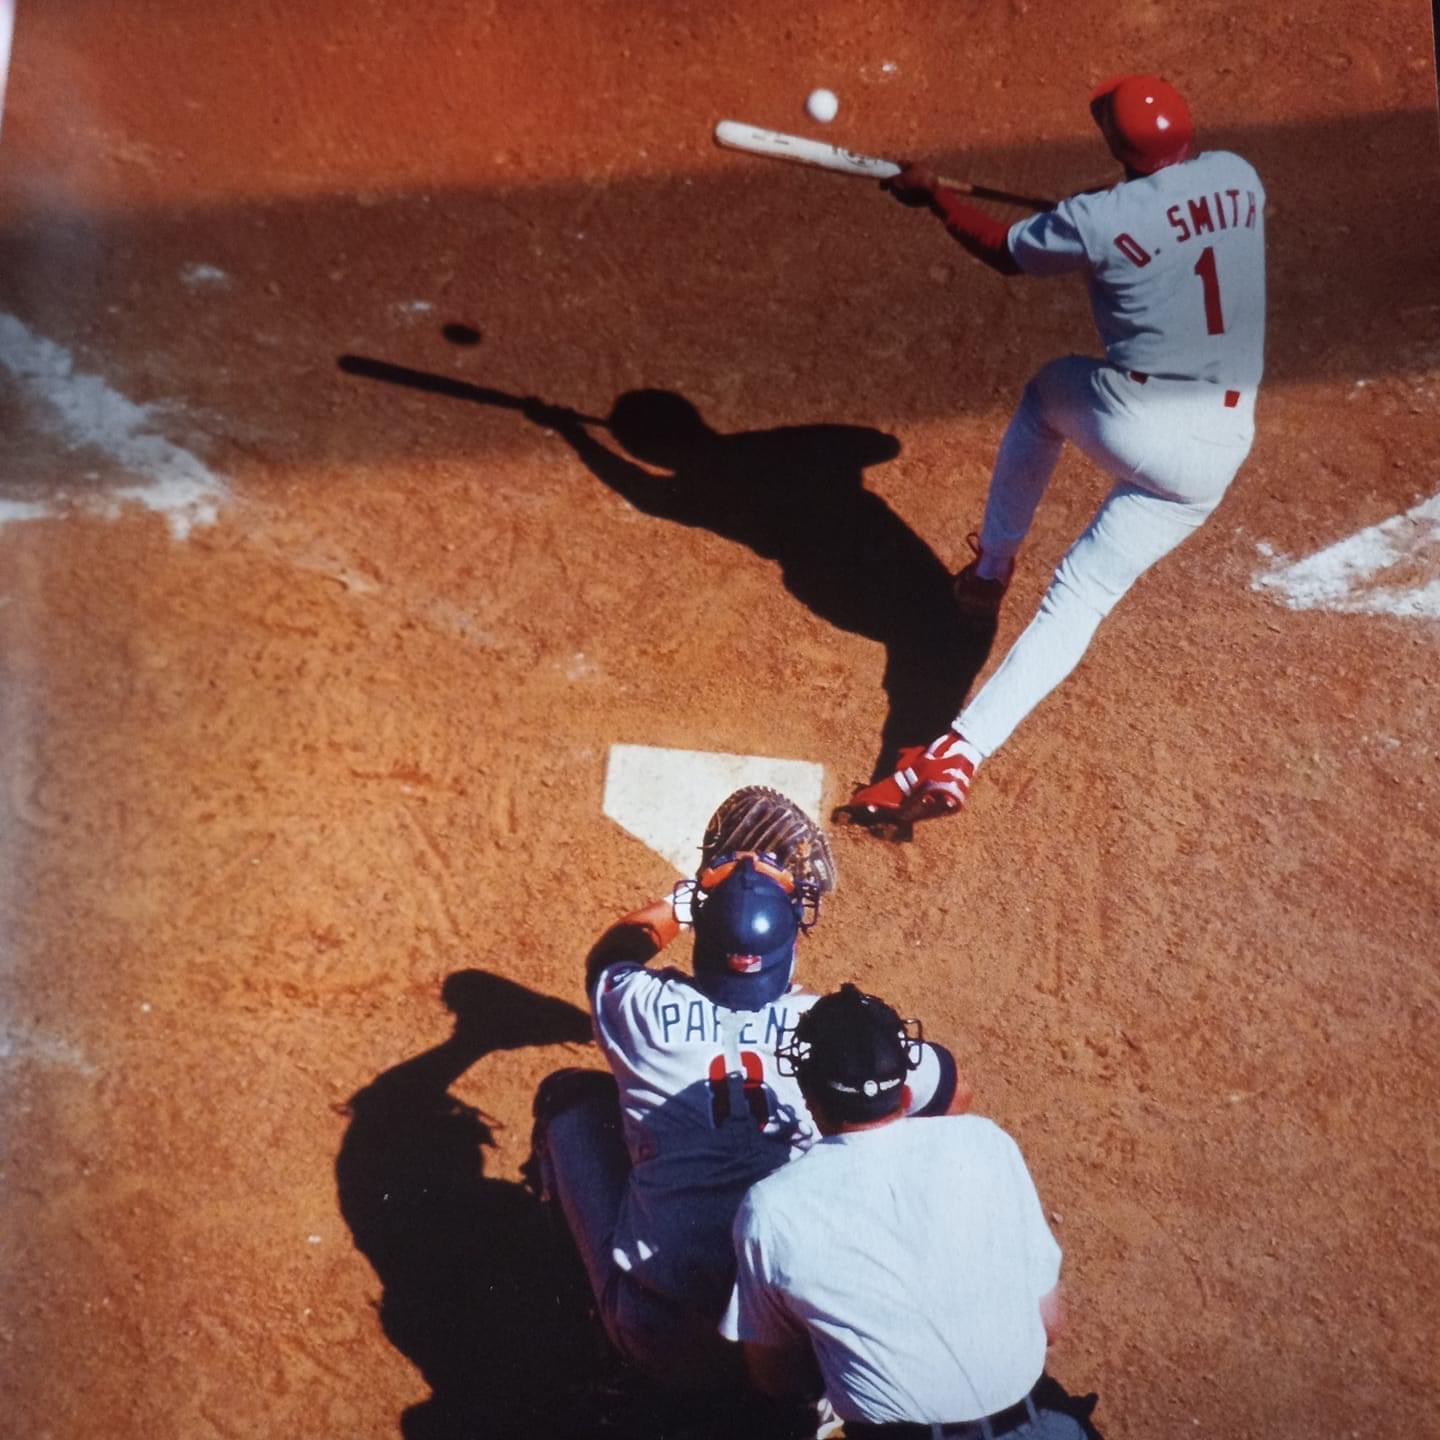 Ozzie Smith with the drag bunt. Something we do not see that often anymore https://t.co/0oiLNNeOI8